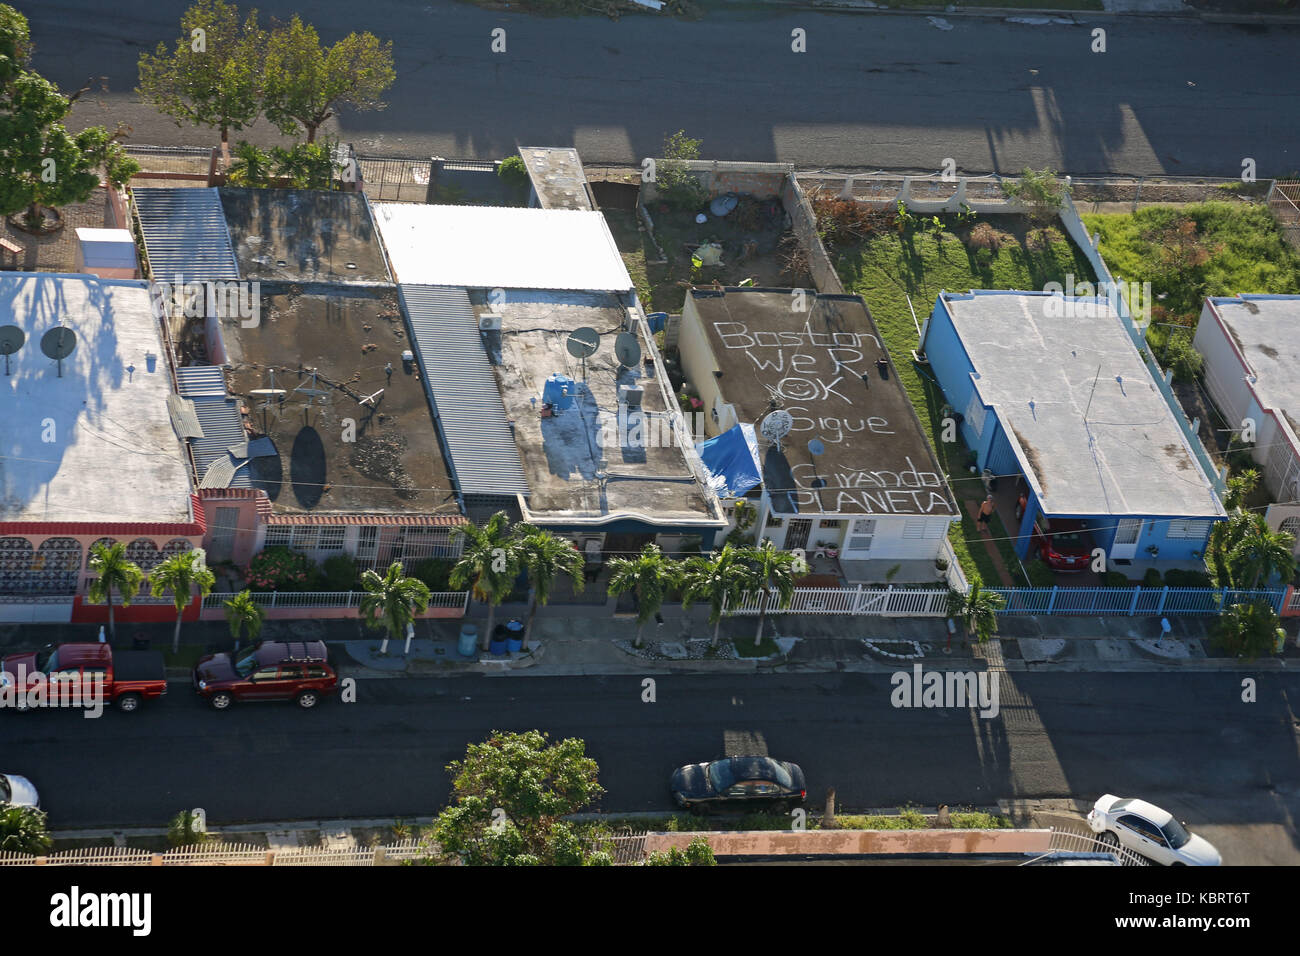 Aerial View of Damaged Caused by Hurricane Maria in Puerto Rico Stock Photo